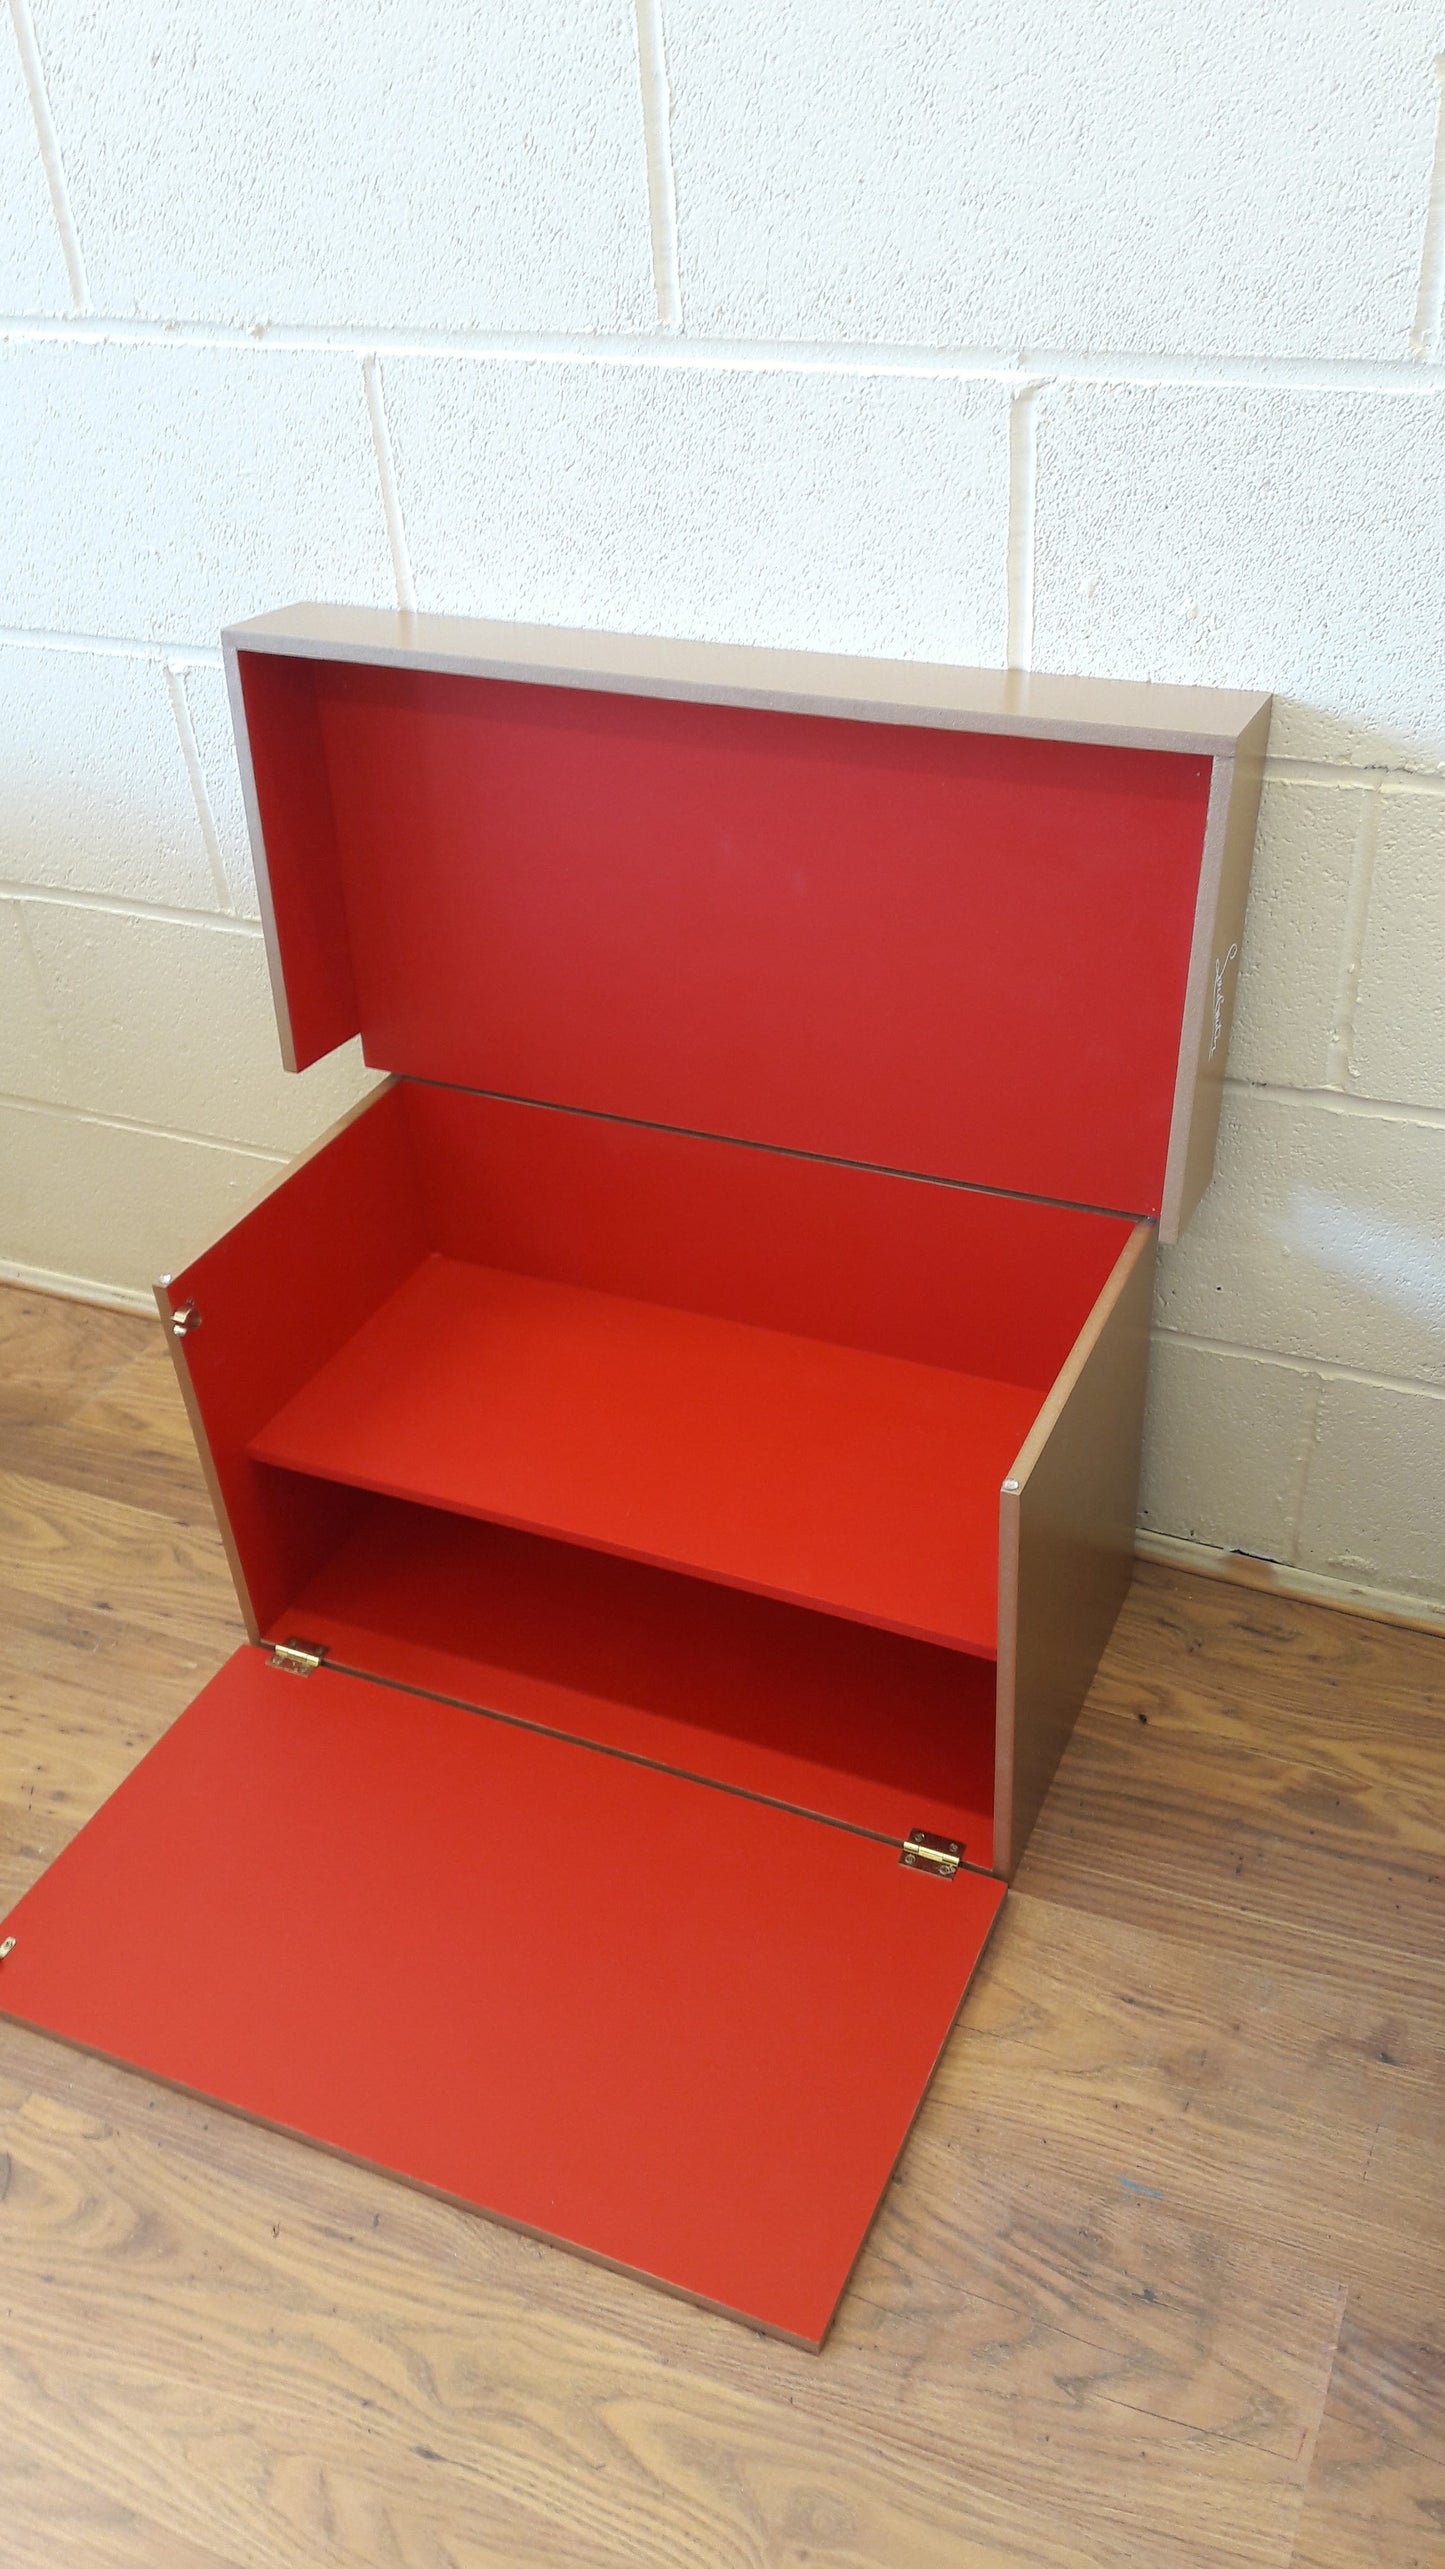 XL Shoe Storage Box - Holds 6-8no pairs of ladies shoes